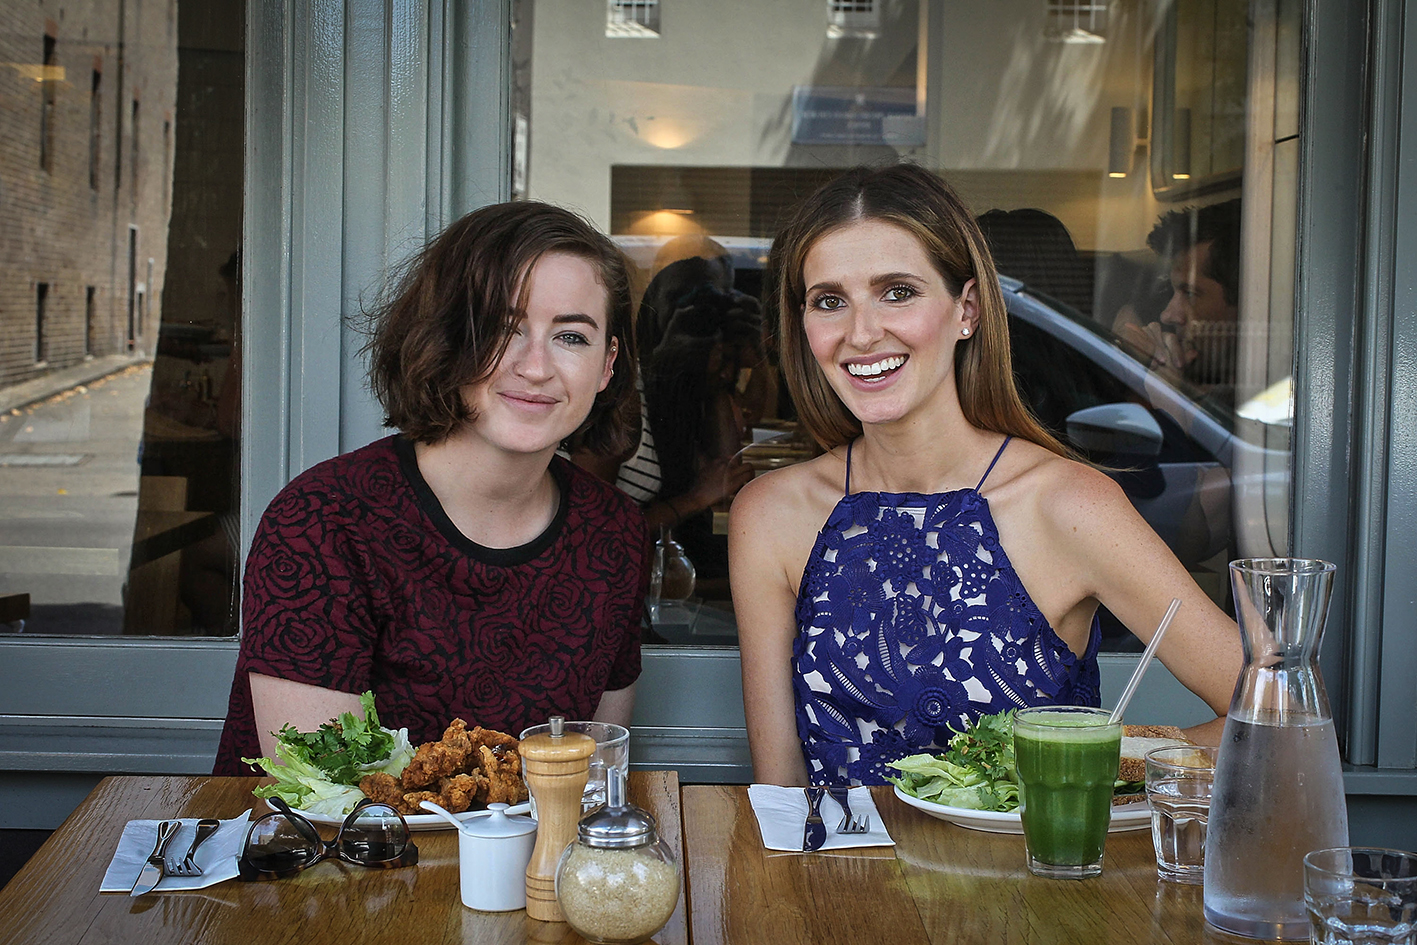 SYDNEY, AUSTRALIA - FEBRUARY 15: Singer, Songwriter Megan Washington is seen at lunch with Kate Waterhouse for her 'Date With Kate' column at Bills, Surry Hills on February 15, 2016 in Sydney, Australia. (Photo by Ben Rushton/Fairfax Media)